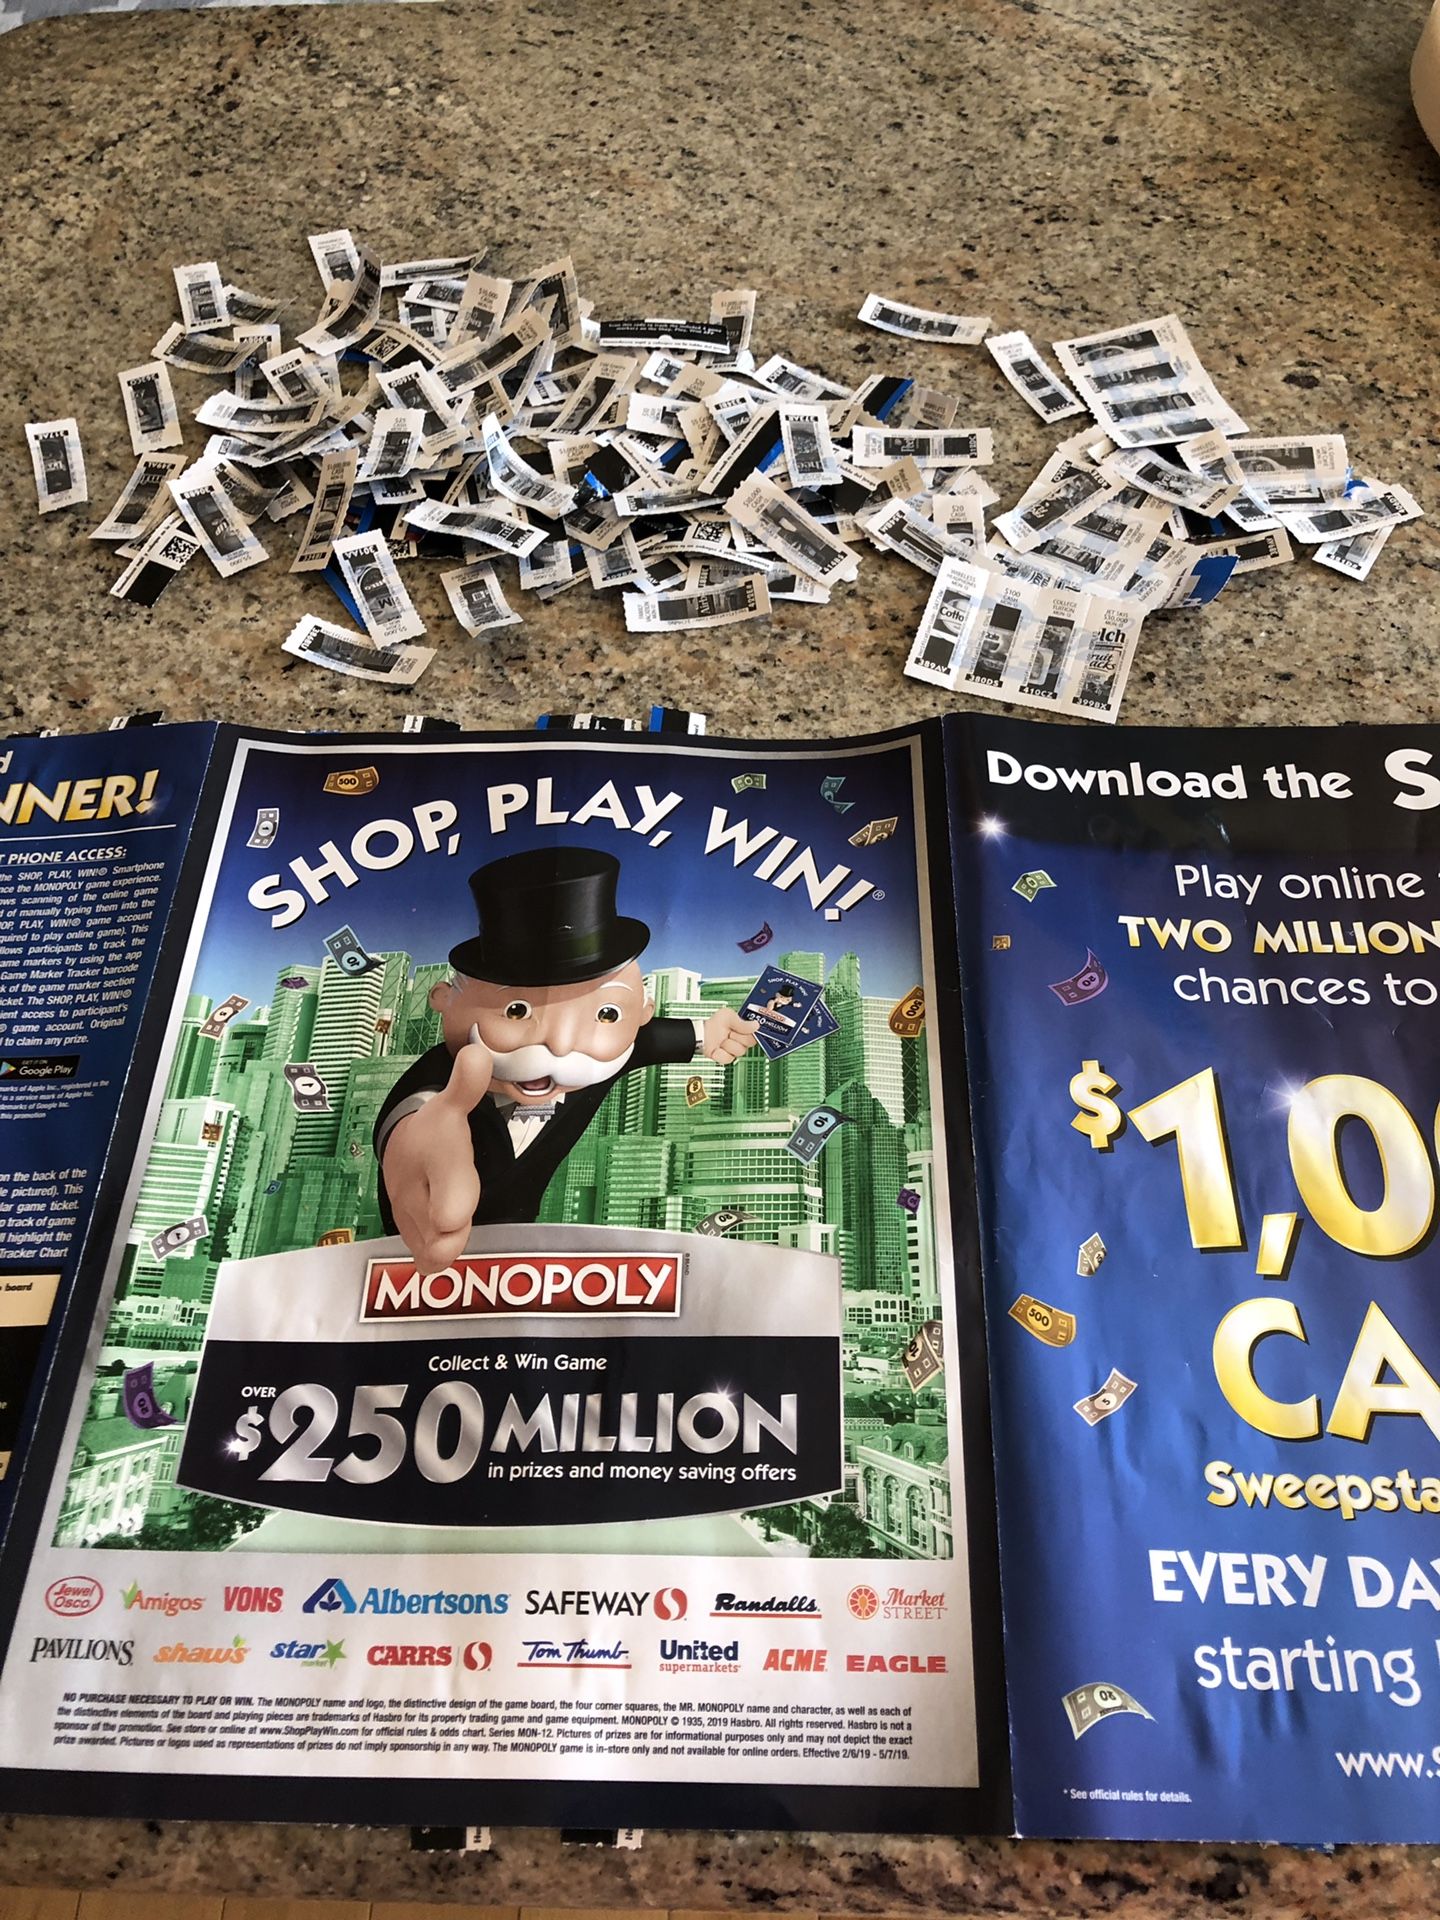 Safeway monopoly game 155 plus tickets see pic